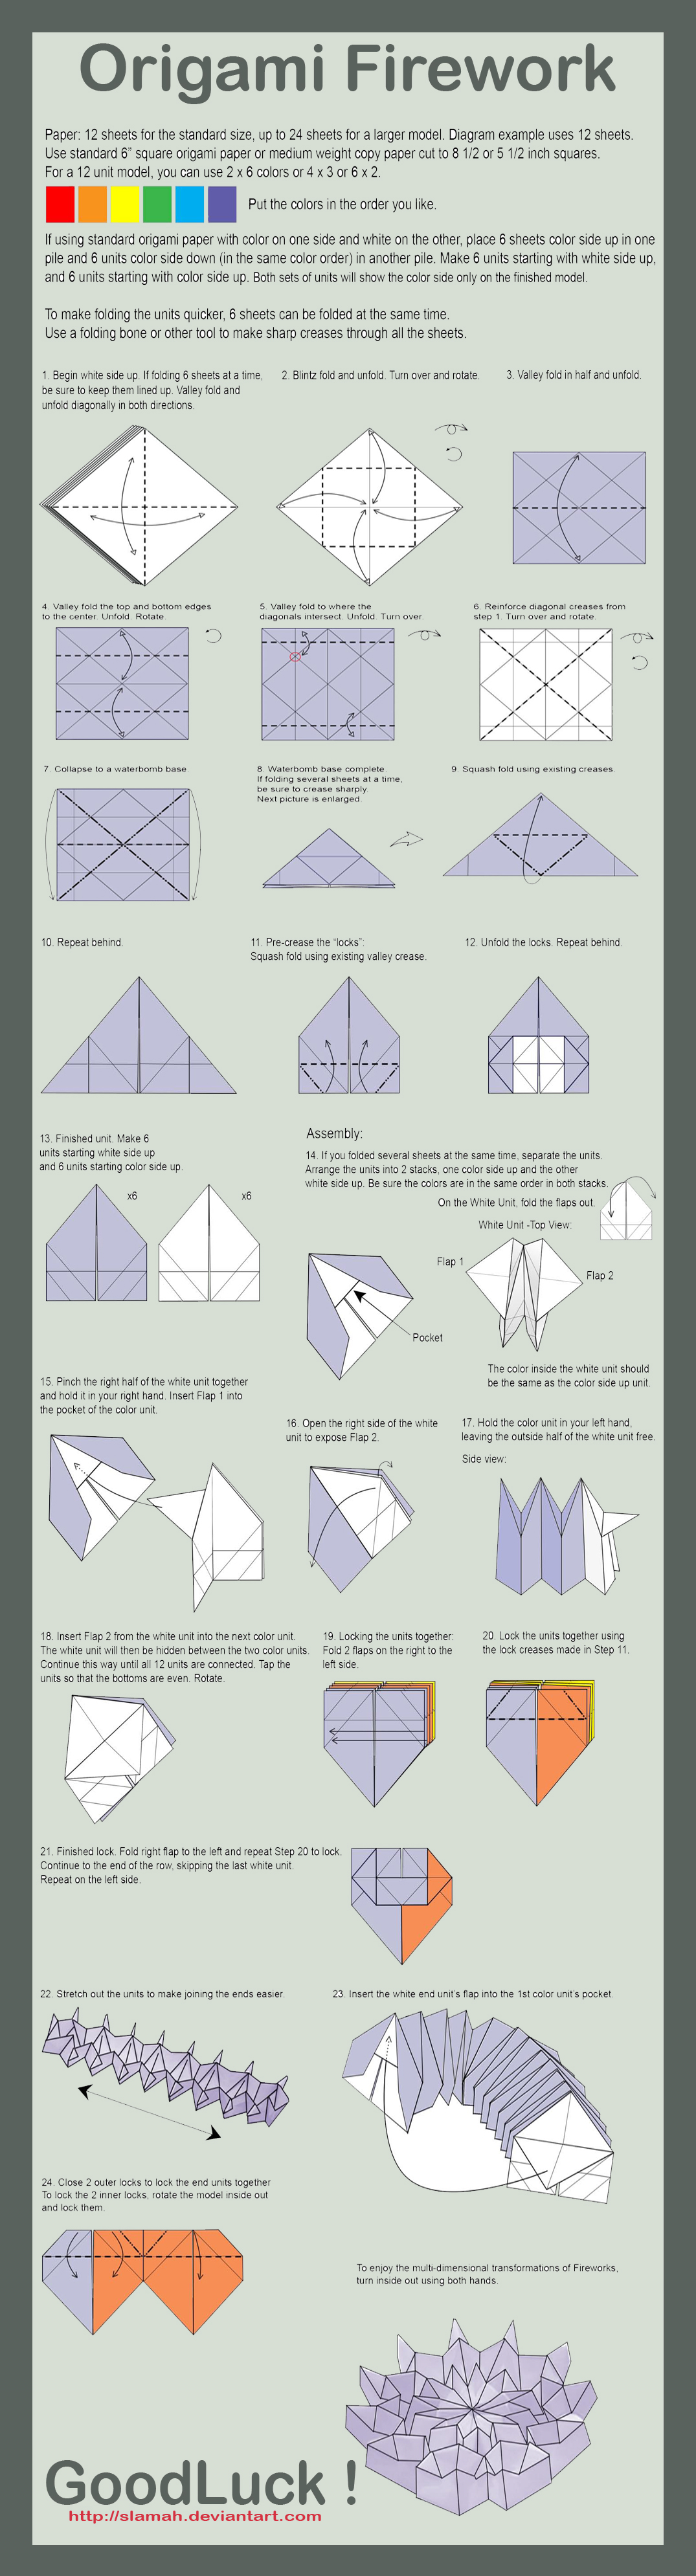 how to make origami fireworks step by step